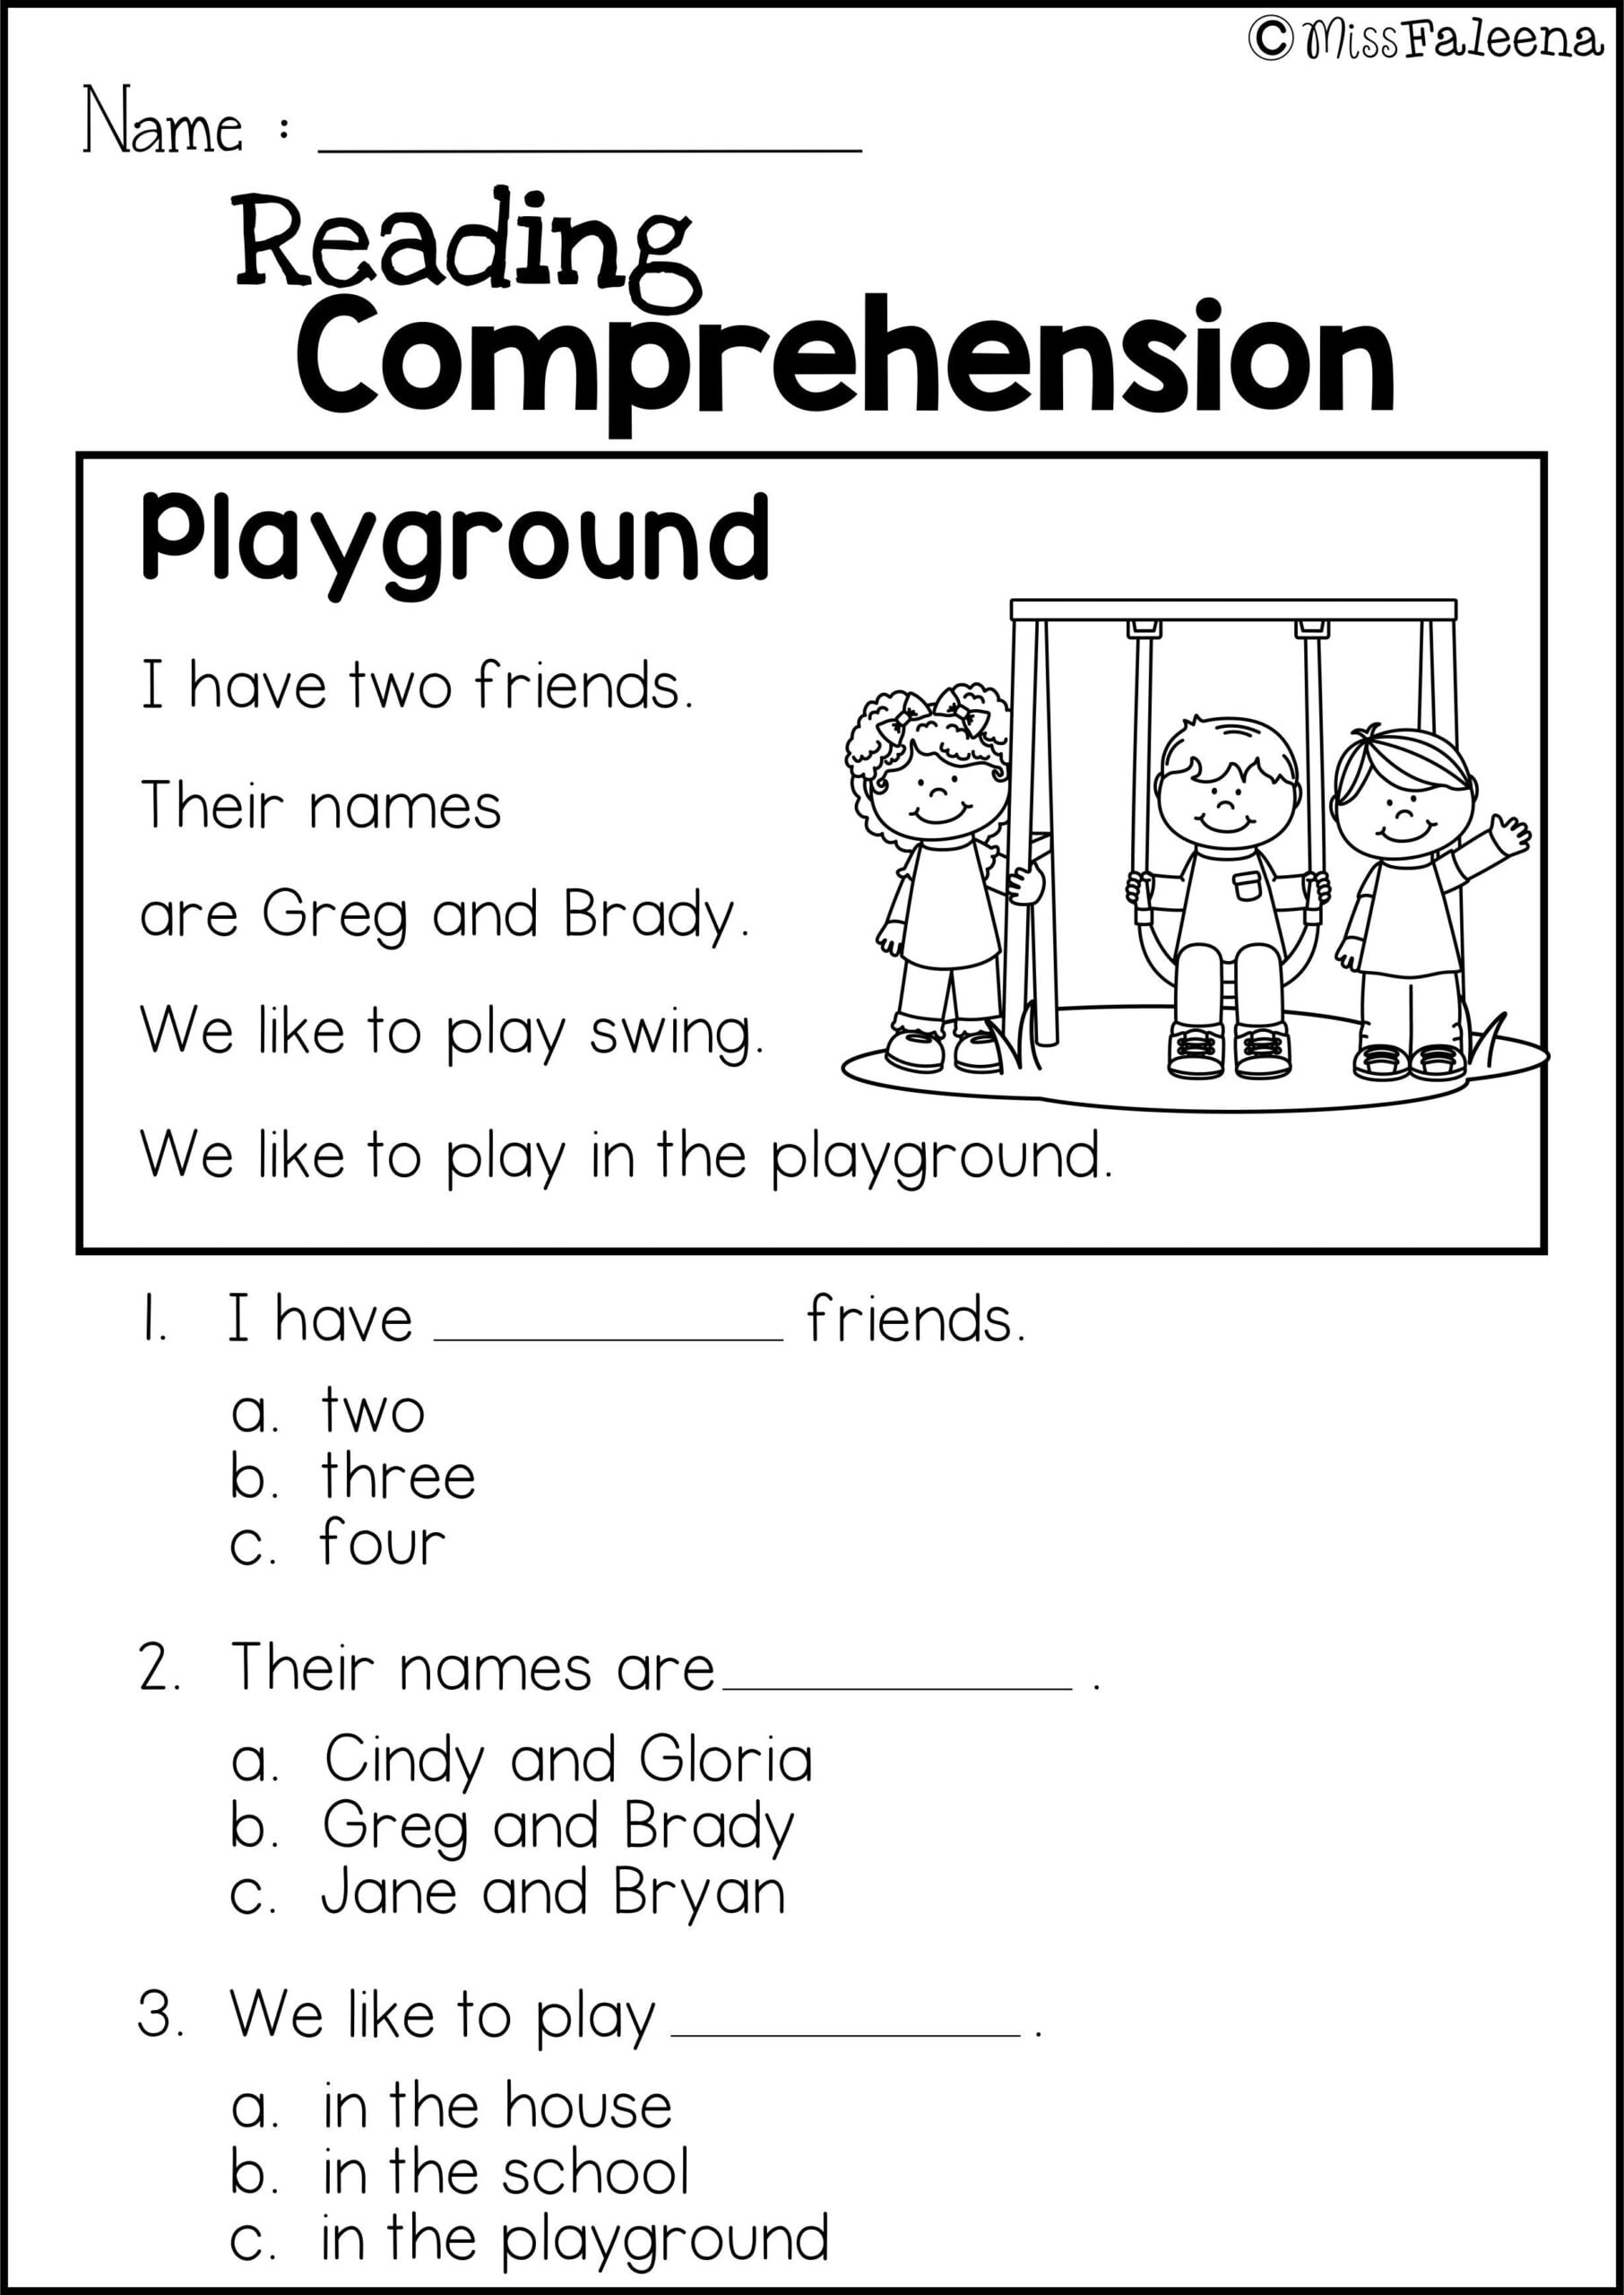 Free Reading Comprehension Practice Reading Comprehension Practice First Grade Reading Comprehension Comprehension Practice